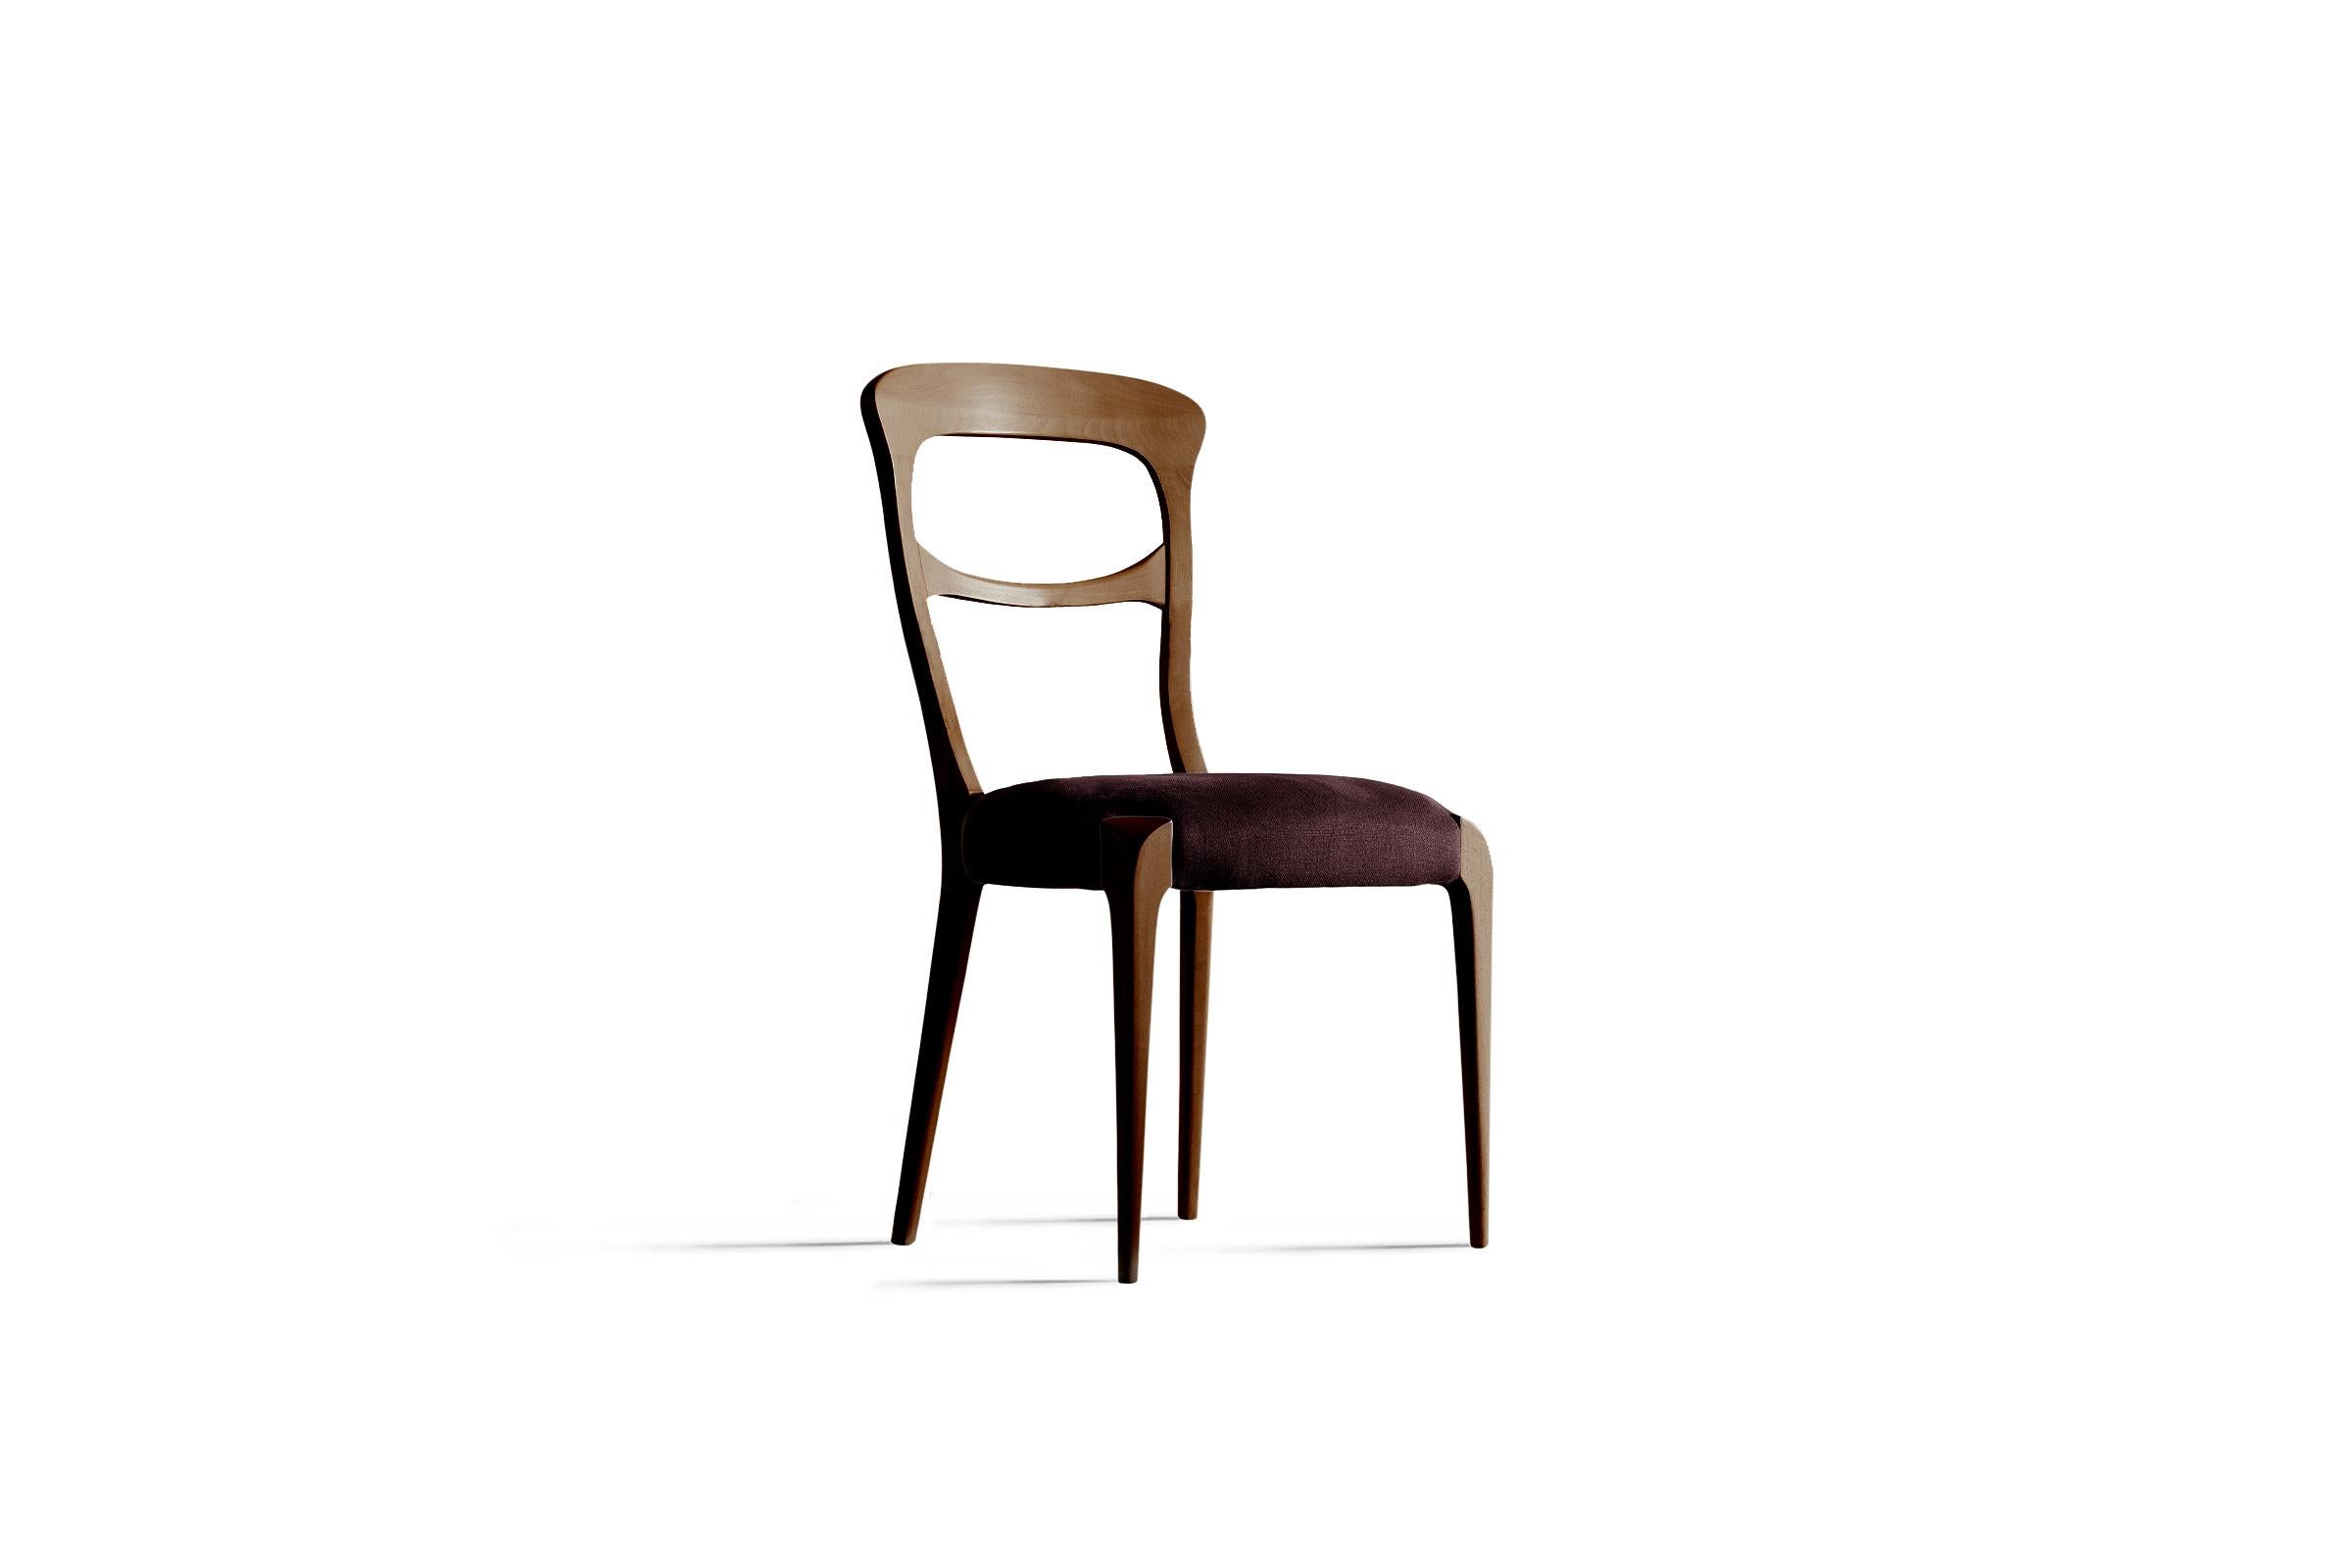 Italian Capotavola Solid Wood Chair, Walnut in Hand-Made Natural Finish, Contemporary For Sale